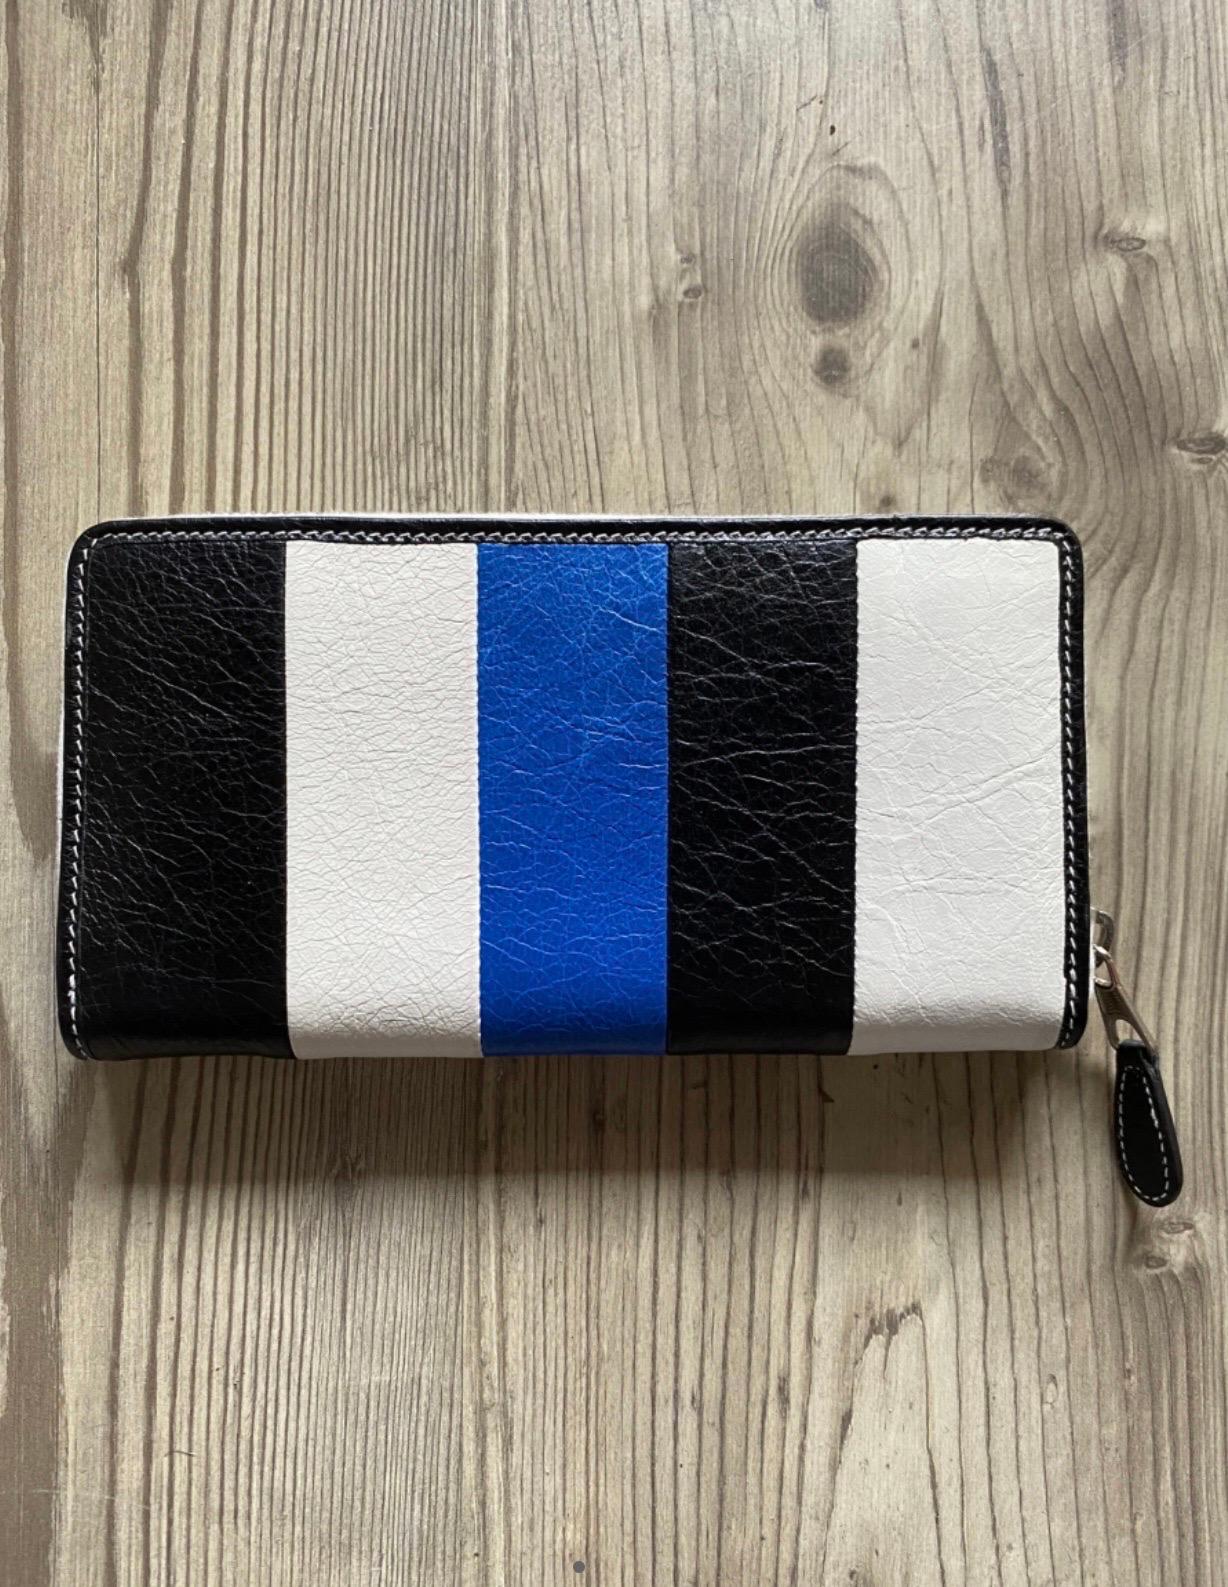 Balenciaga wallet.
Fall 2016 by Demna Gvasalia. in lambskin with white, black and blue stripes, black leather interior, length 19cm, width 11cm, height 2cm, new, never used, with dust bag and box